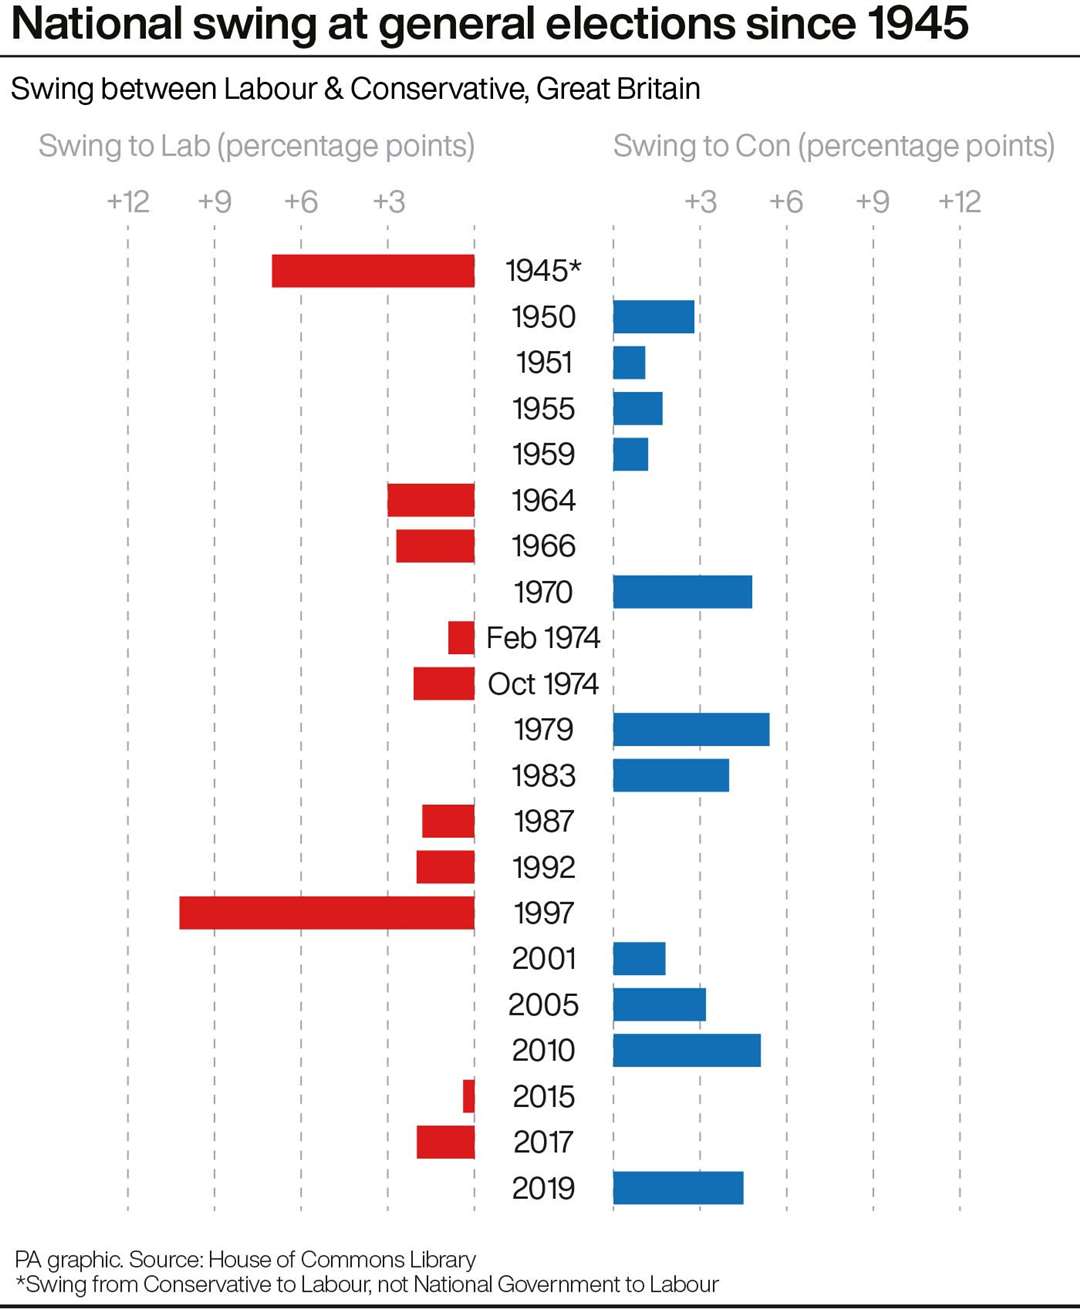 Swings between the two major parties at general elections since 1945 (PA Graphics)